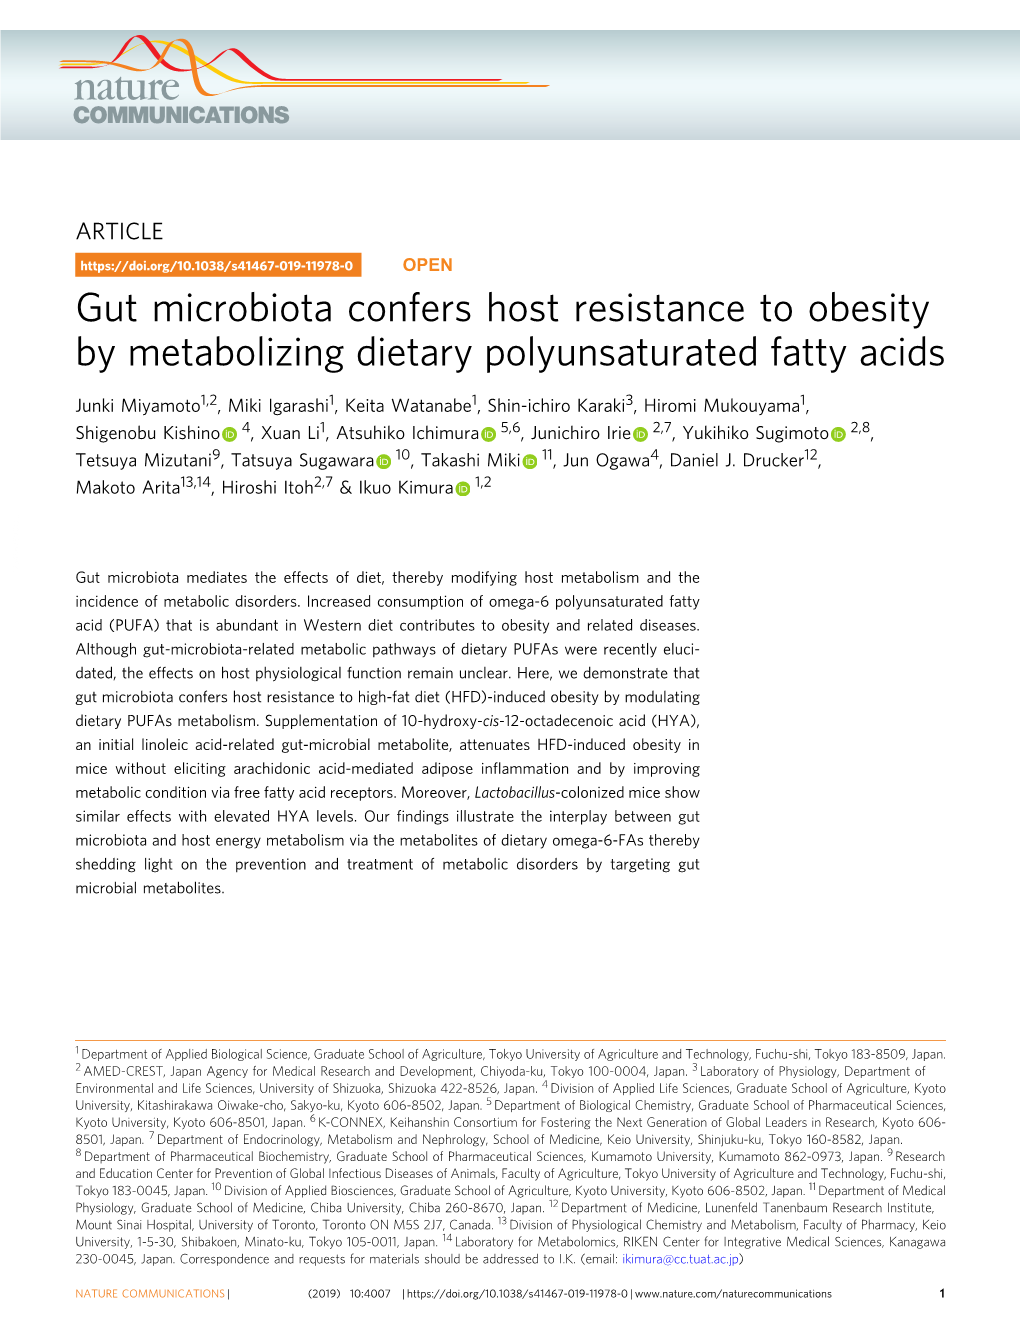 Gut Microbiota Confers Host Resistance to Obesity by Metabolizing Dietary Polyunsaturated Fatty Acids